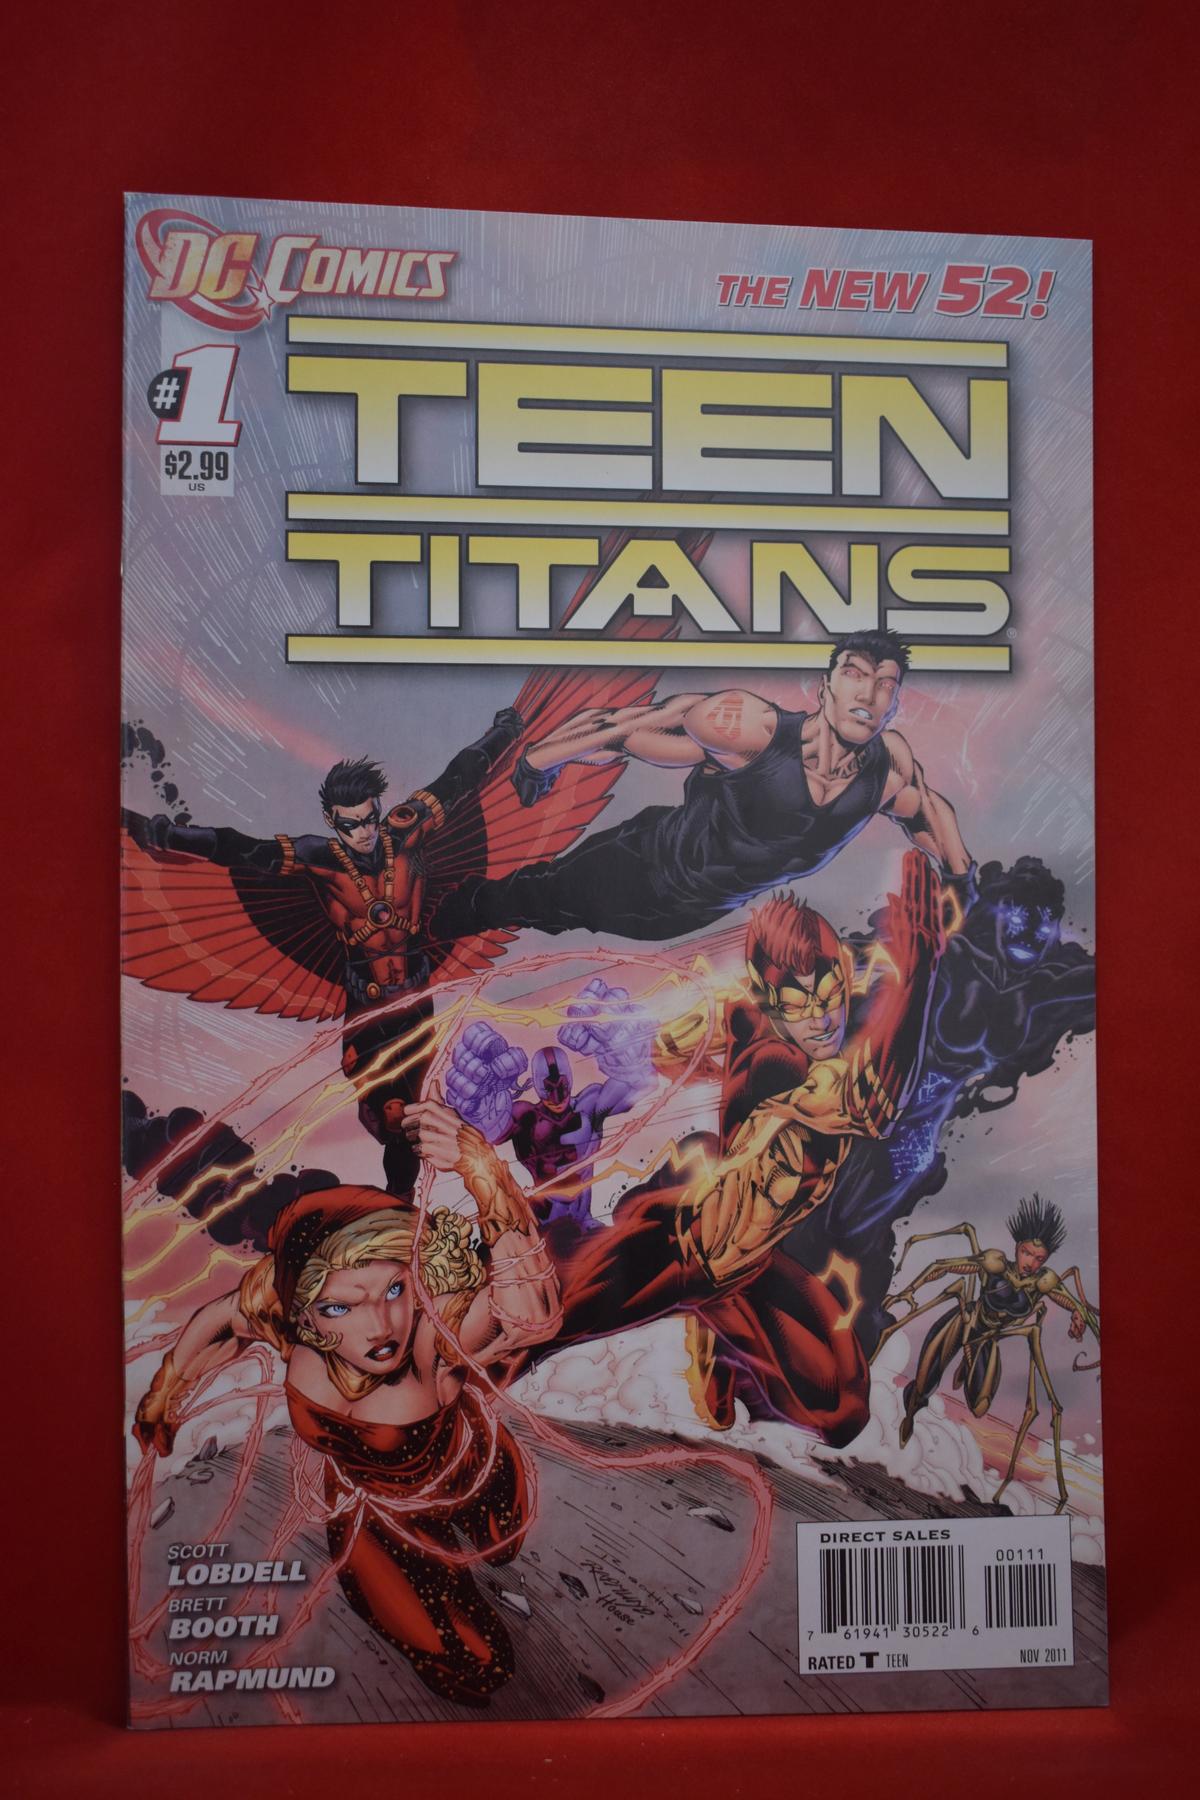 TEEN TITANS #1 | 1ST CAMEO AND COVER APP OF BUNKER, 1ST ISSUE - NEW 52